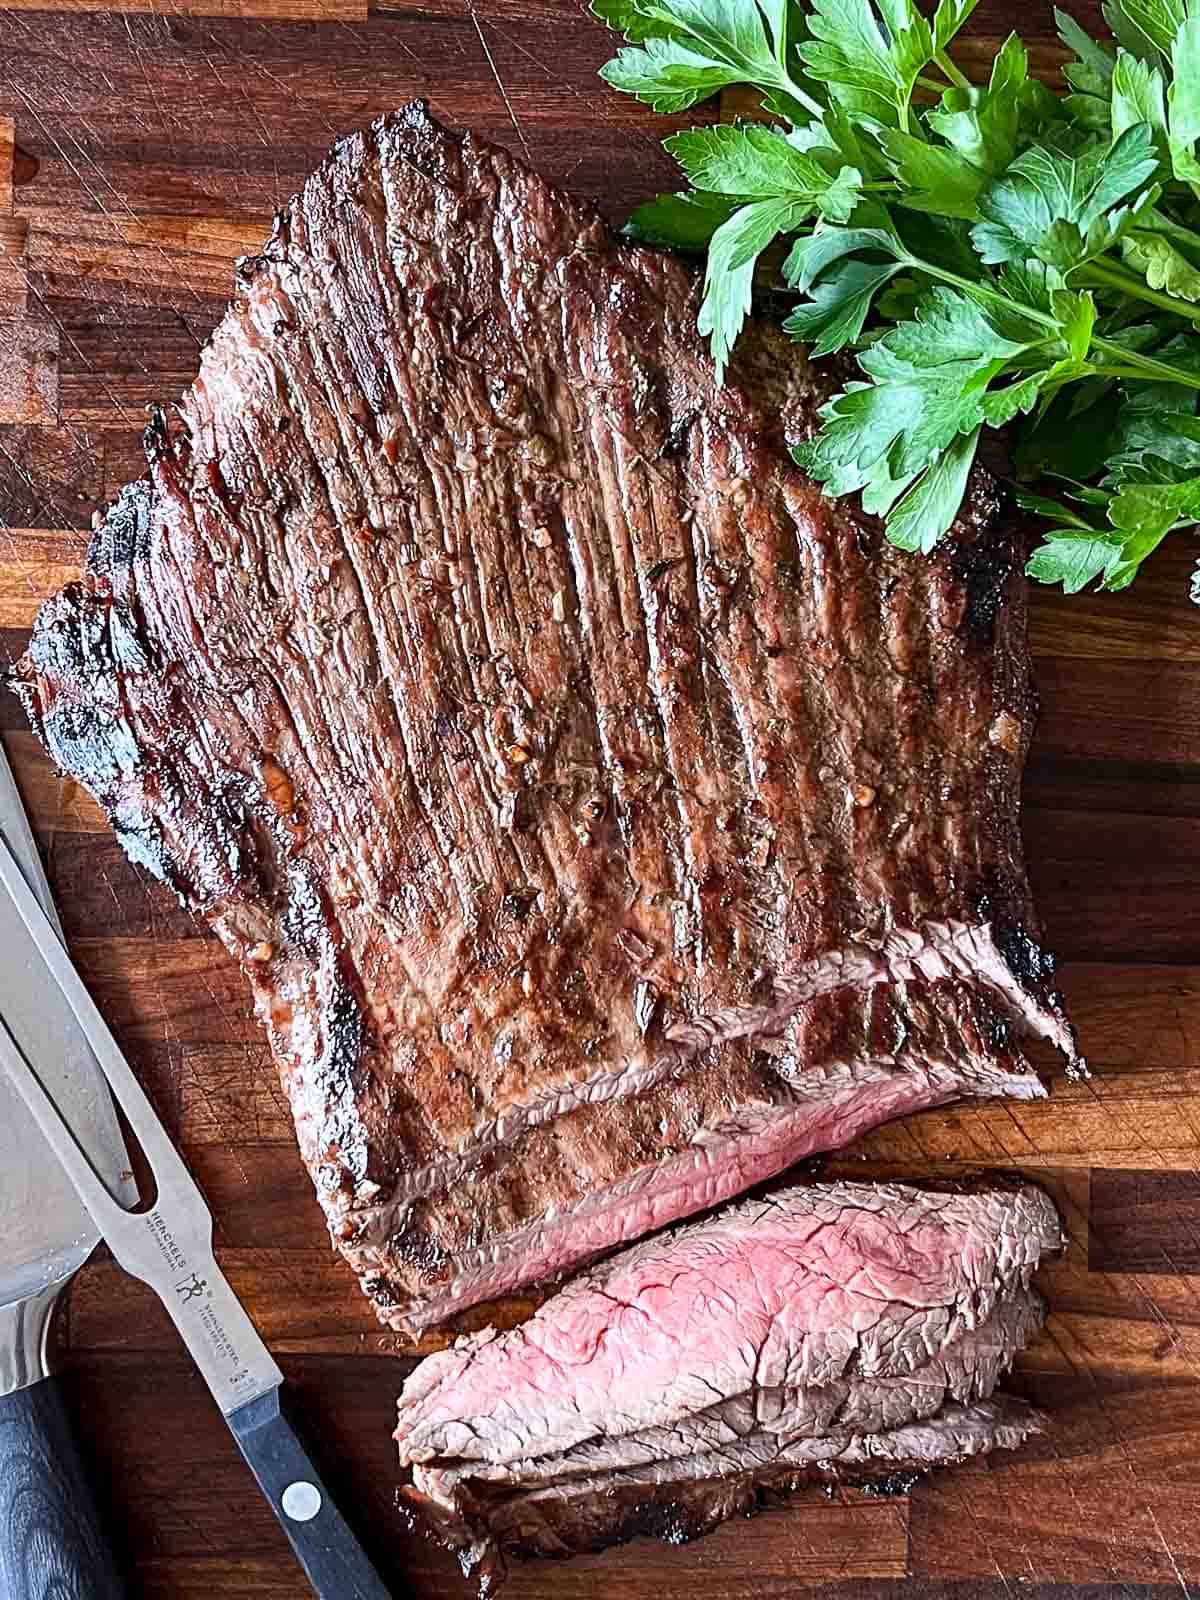 A whole grilled marinated flank steak with a few slices on a cutting board with Italian parsley garnish.